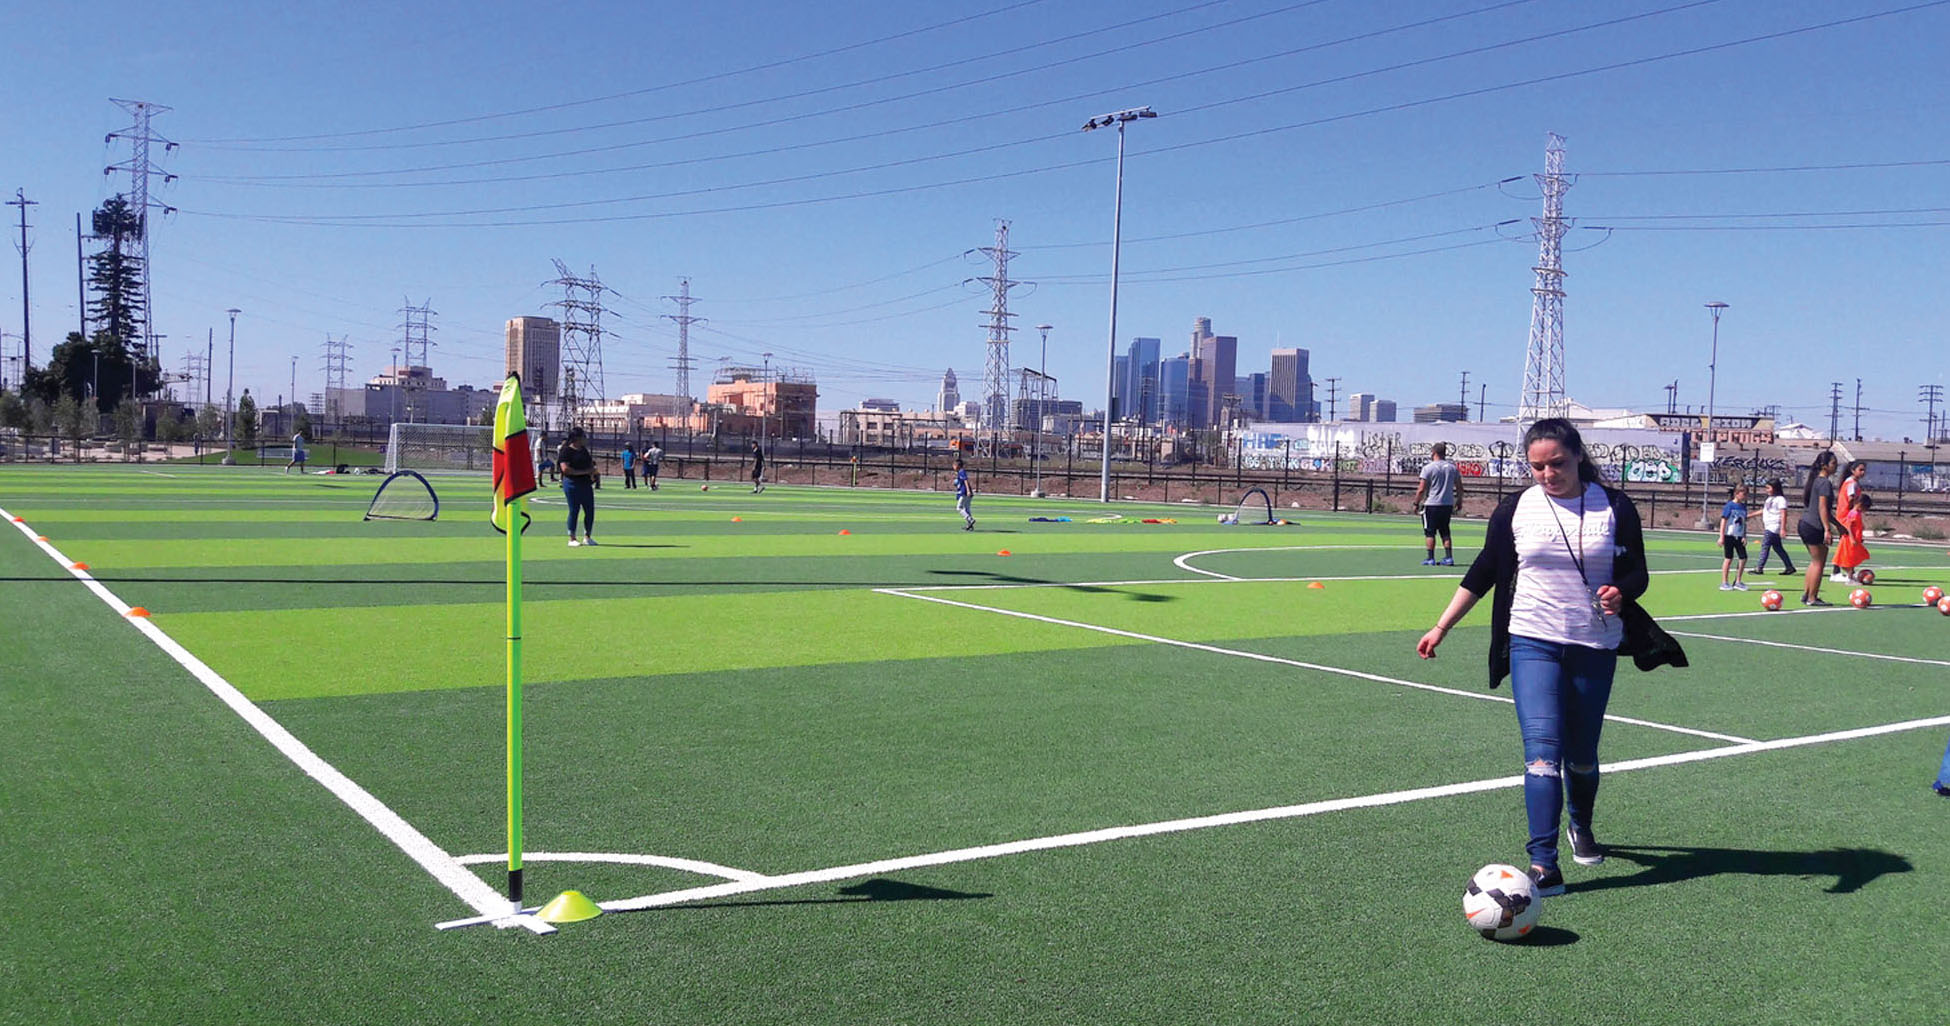 People practicing soccer on a new turf field with power lines in the background